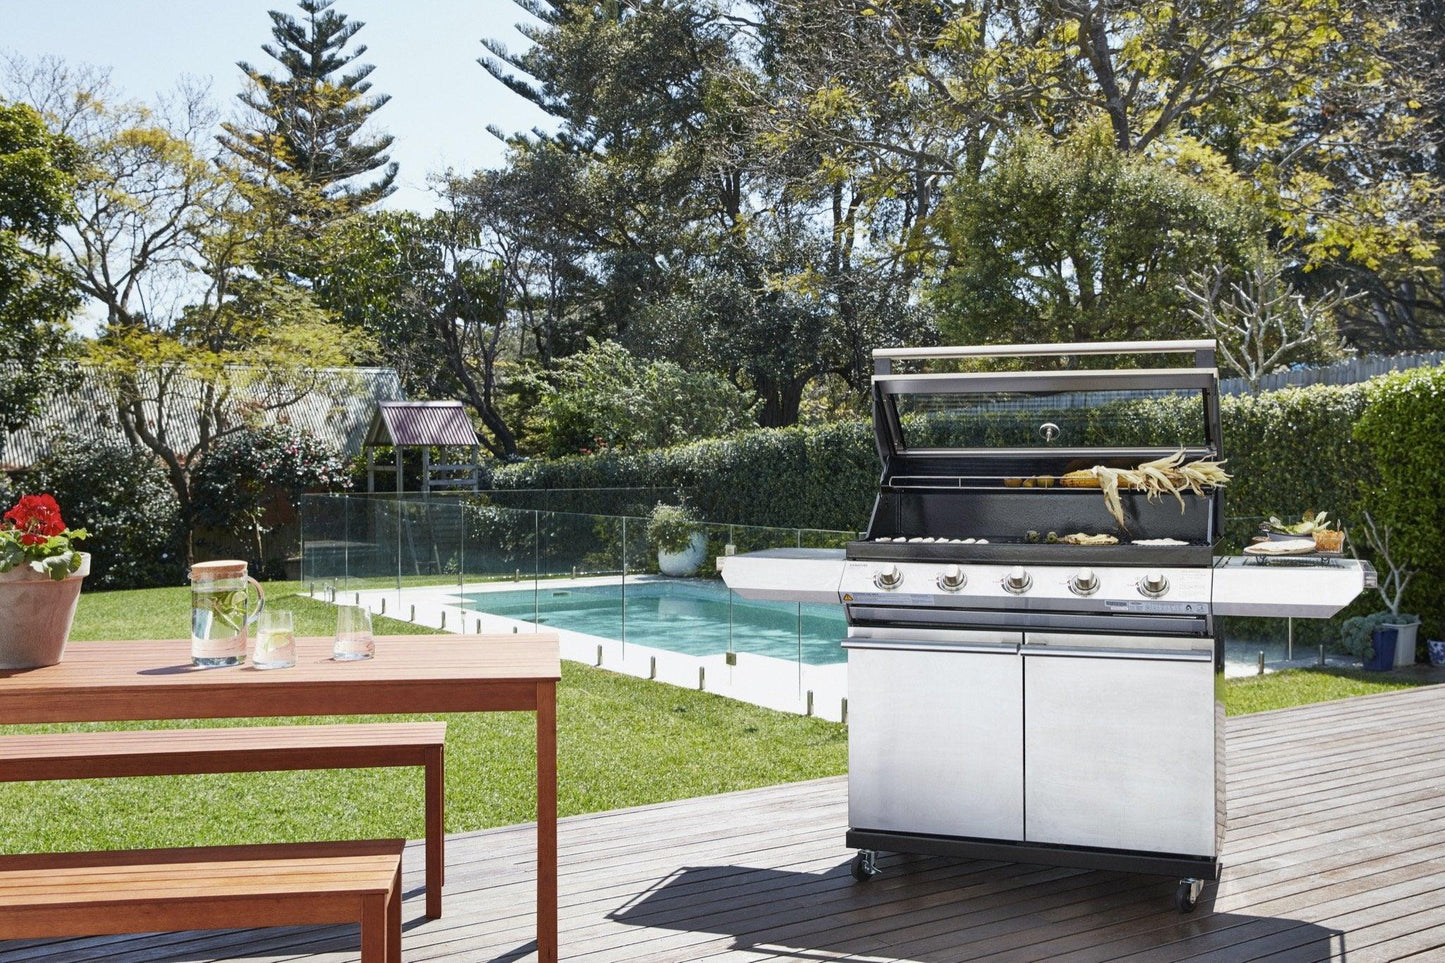 A Brisks BeefEater 1200S Series 5 Burner BBQ & Trolley stands on a wooden deck in a backyard, epitomizing outdoor living. The grill's lid is open, revealing food cooking inside. Nearby is a wooden table with a glass pitcher, glass, and a small plant. Behind the deck is a swimming pool enclosed by a glass fence. Trees surround the yard.